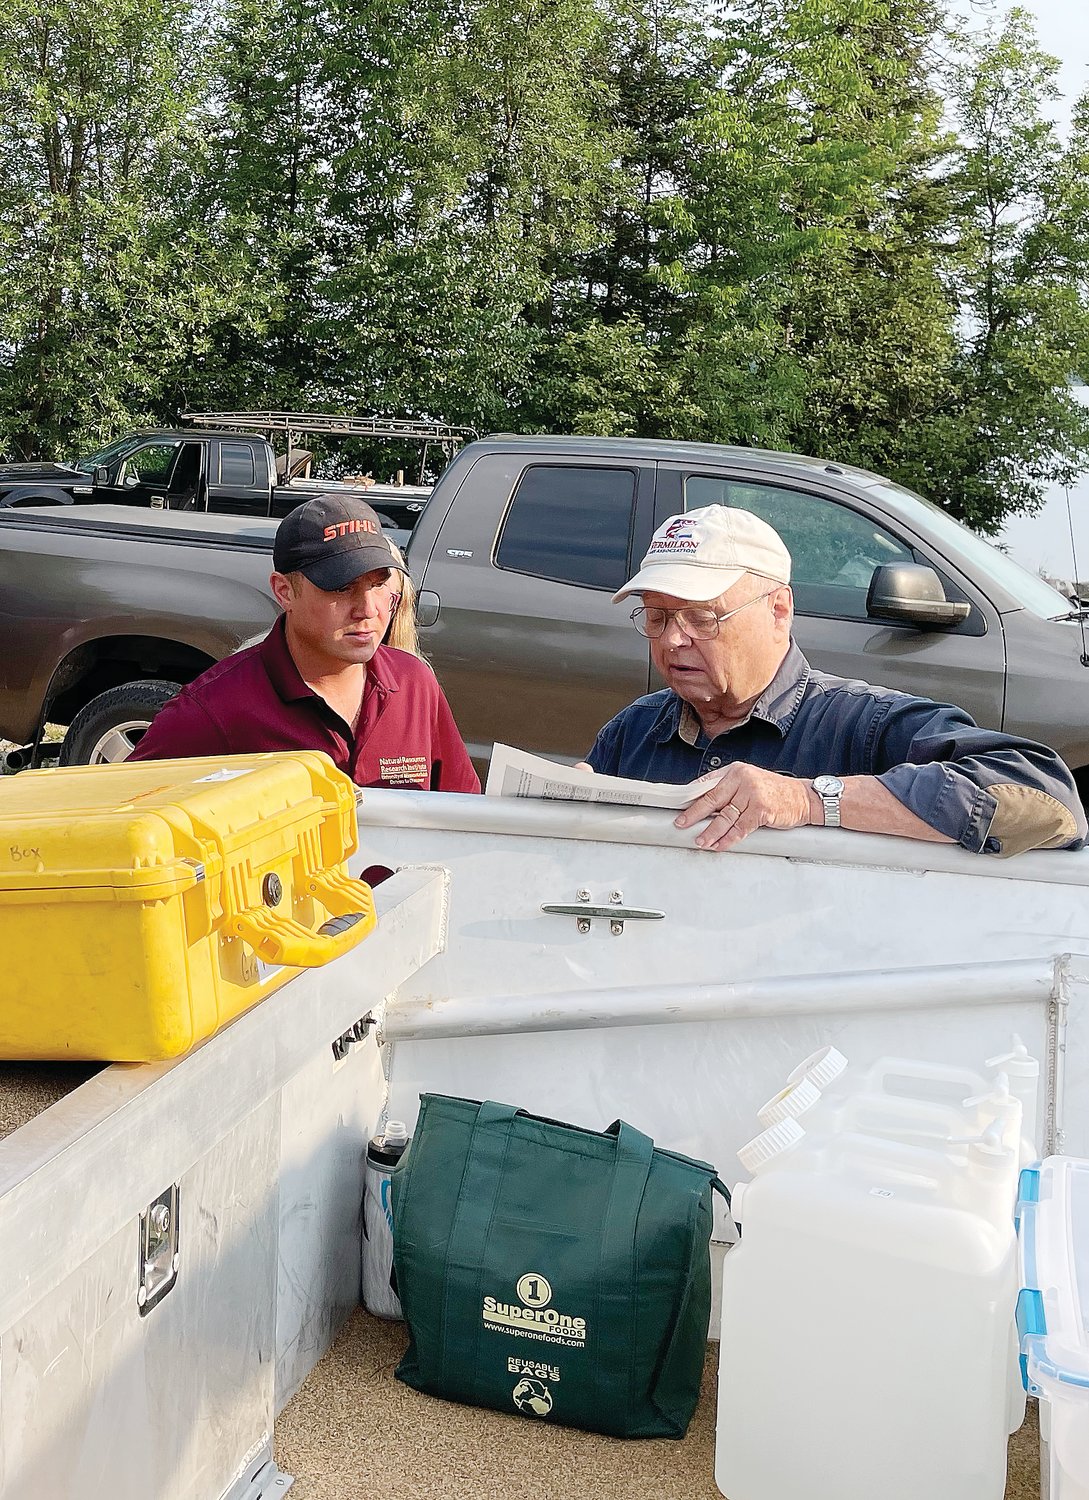 Lead researcher Josh Dumke (left) looks over the day’s plan with Jeff Lovgren from the Vermilion Lake Association.